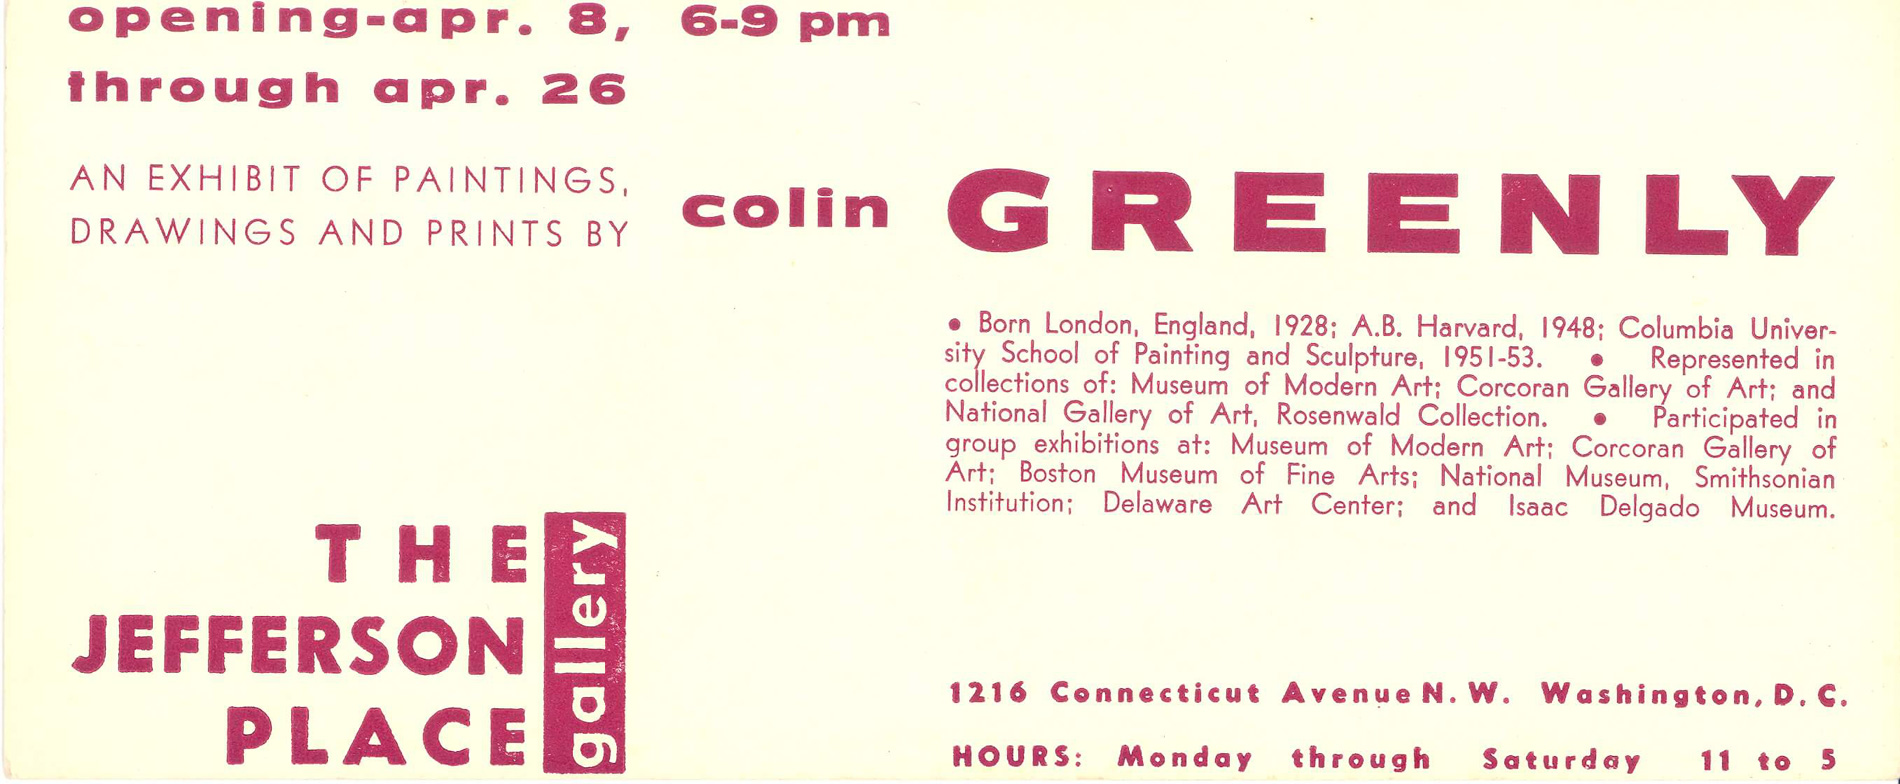 Announcement card for Colin Greenly at Jefferson Place Gallery